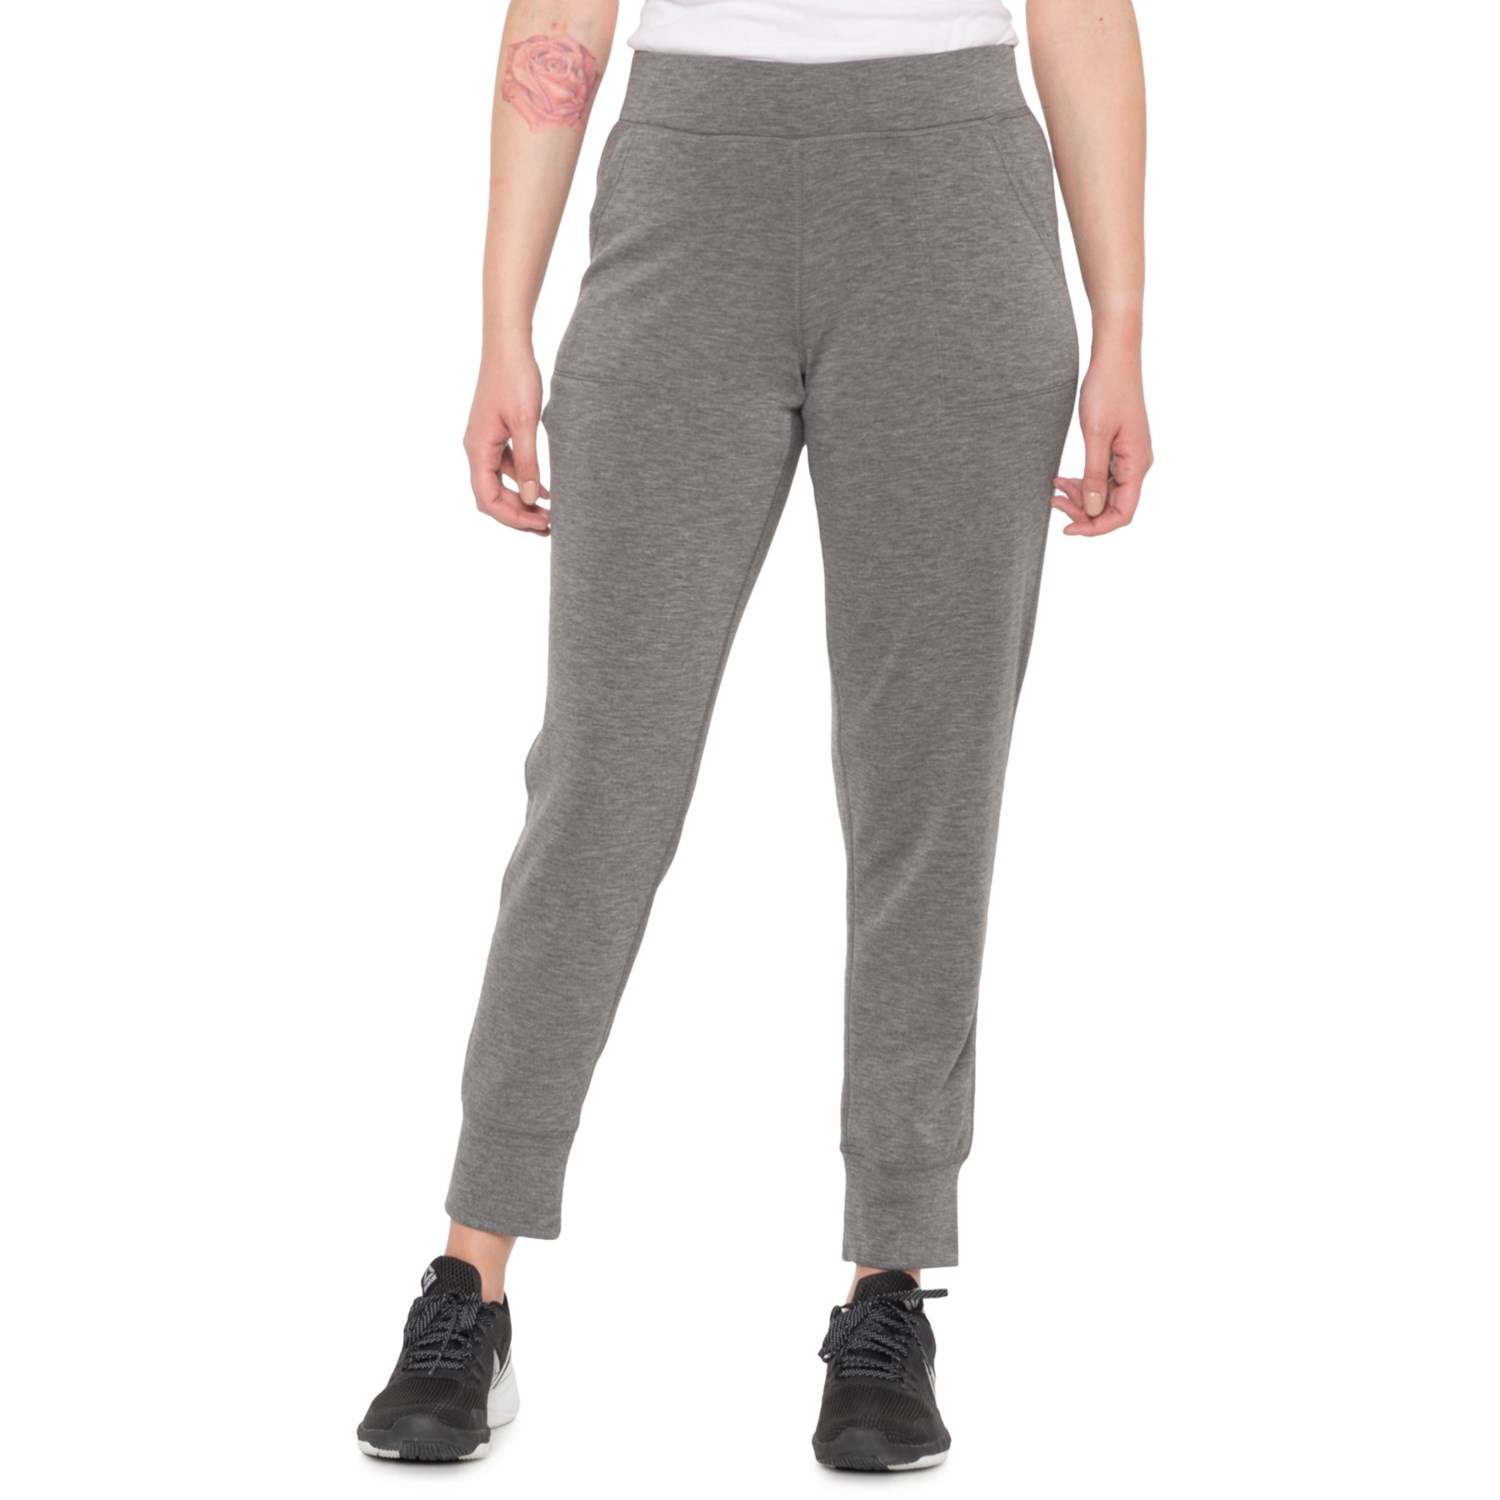 Gaiam Hudson Joggers (For Women) - Save 66%